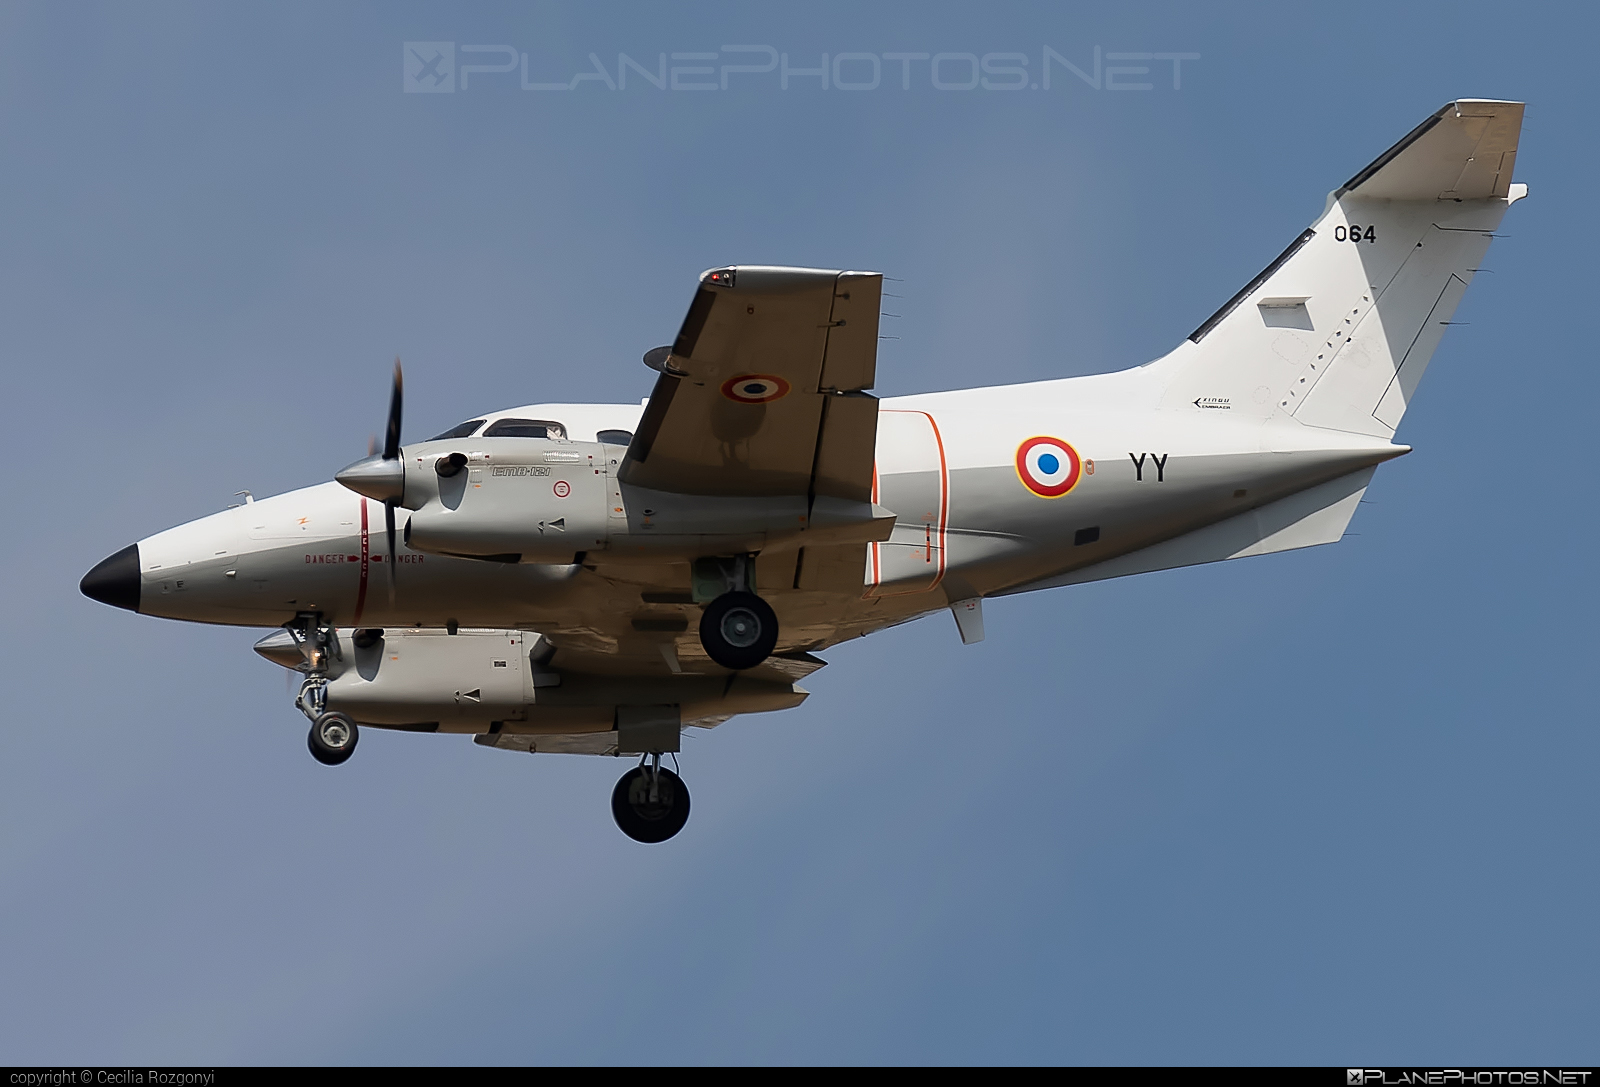 Embraer EMB-121 Xingu - YY operated by Armée de l´Air (French Air Force) #FerencLisztIntl #armeedelair #emb121 #emb121xingu #embraer #embraerxingu #frenchairforce